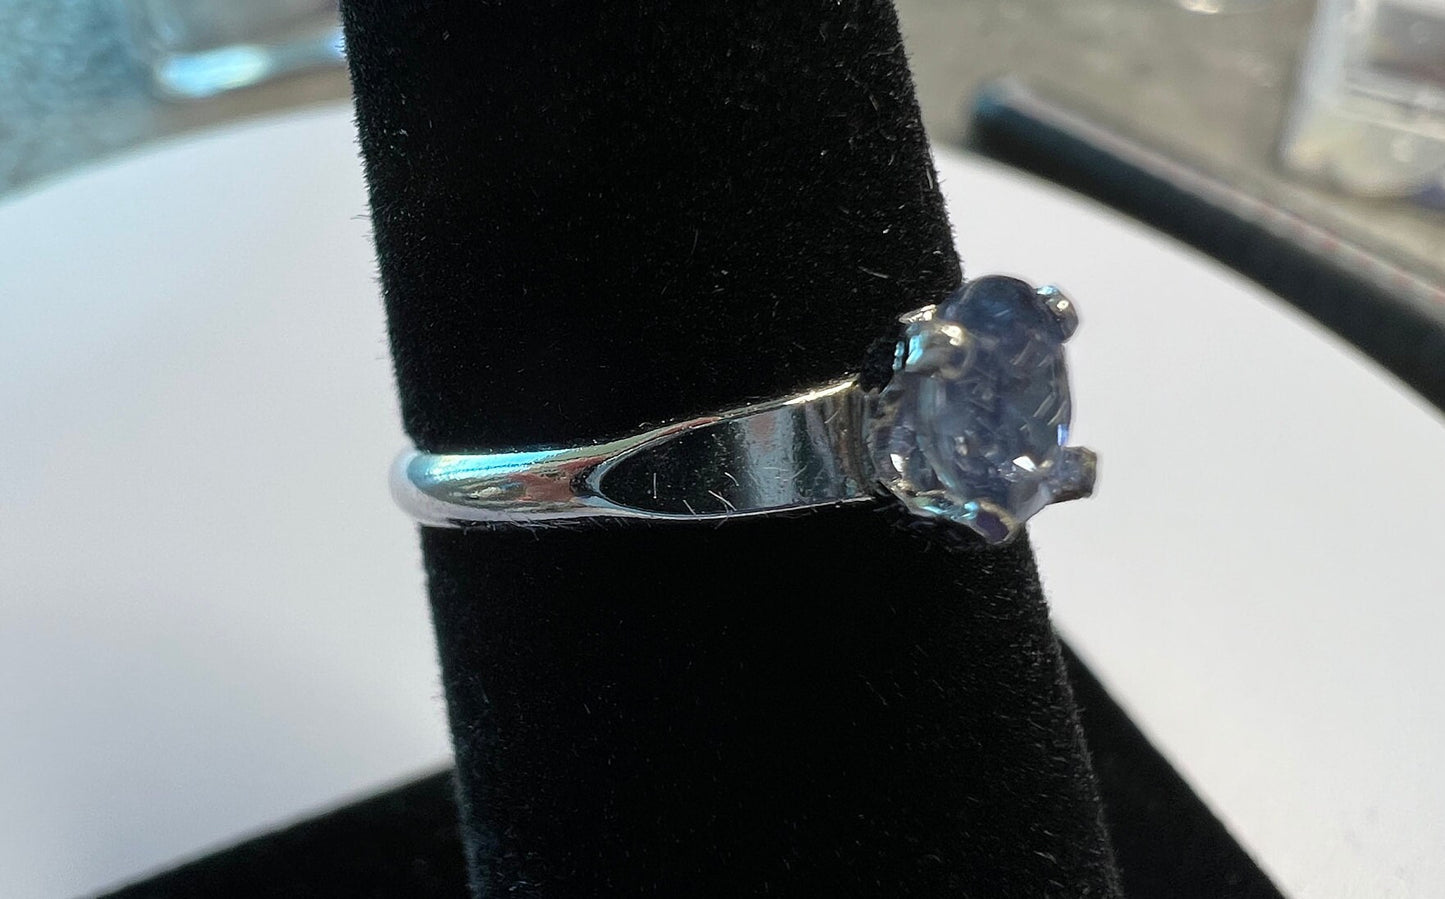 0.25 ct Blue Sapphire Solitaire Ring